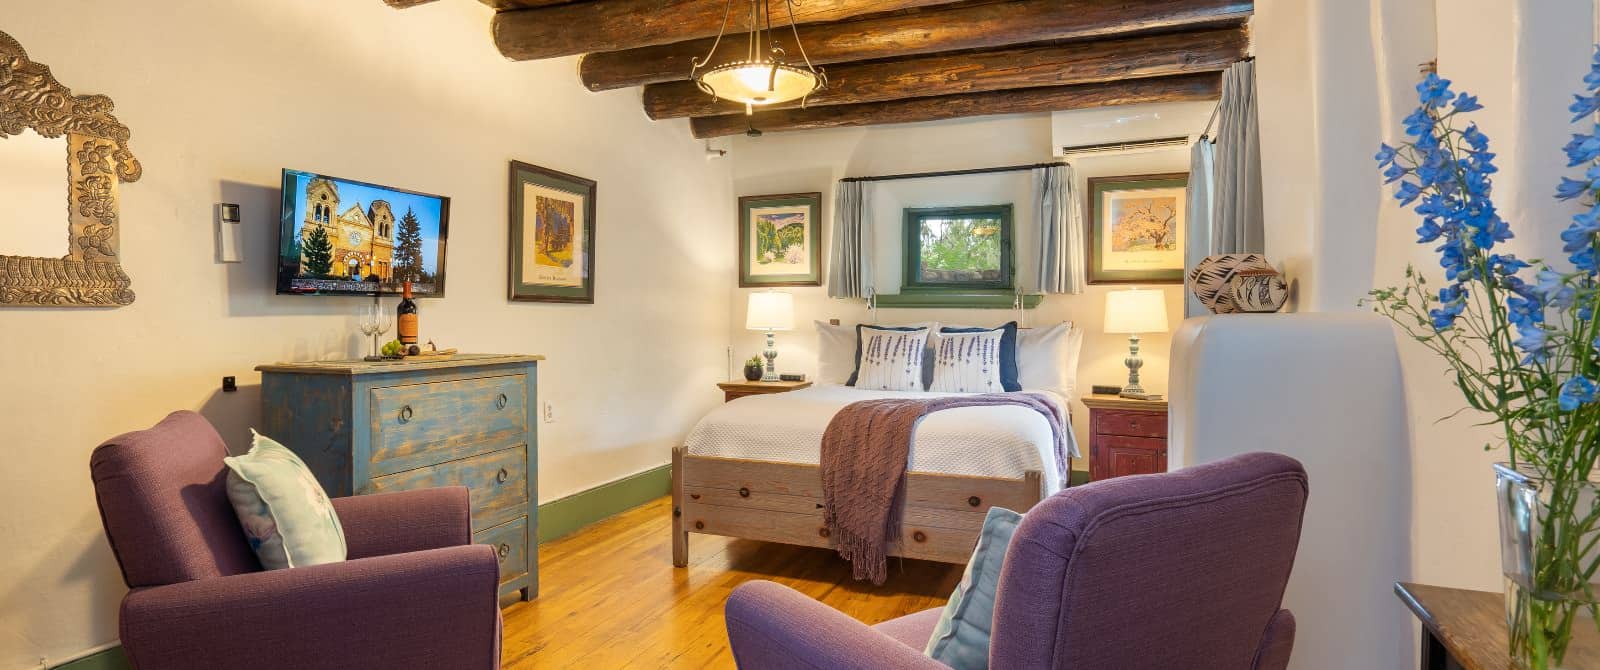 Cozy timber beam bedroom with southwest-style furniture, wood floor and two mauve armchairs.